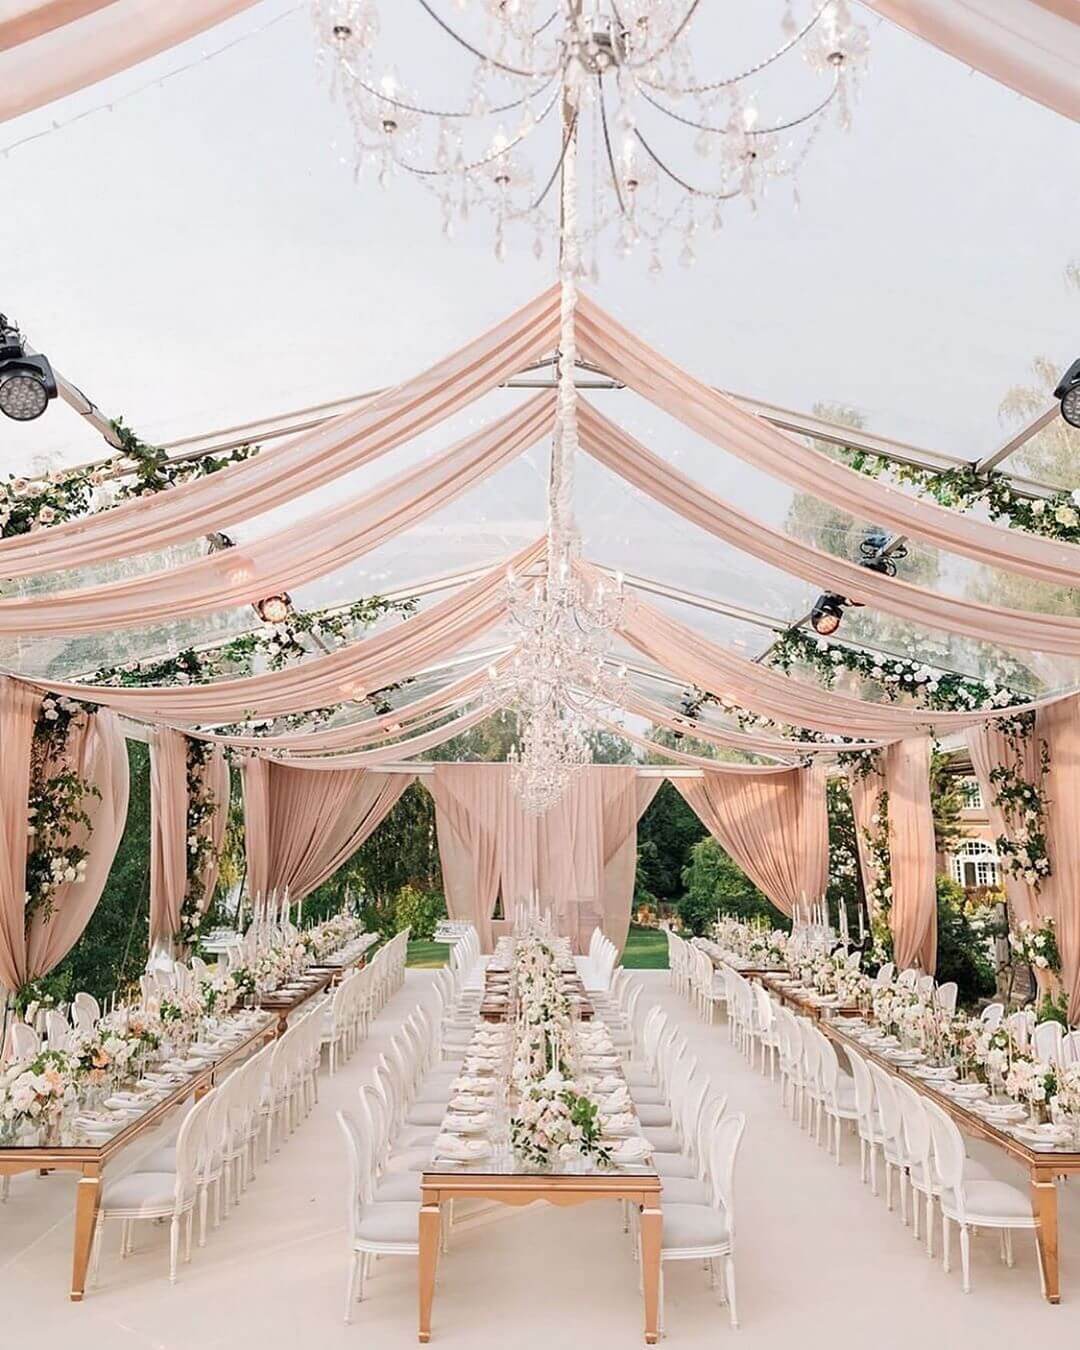 Get These Outdoor Wedding Decorations Ideas